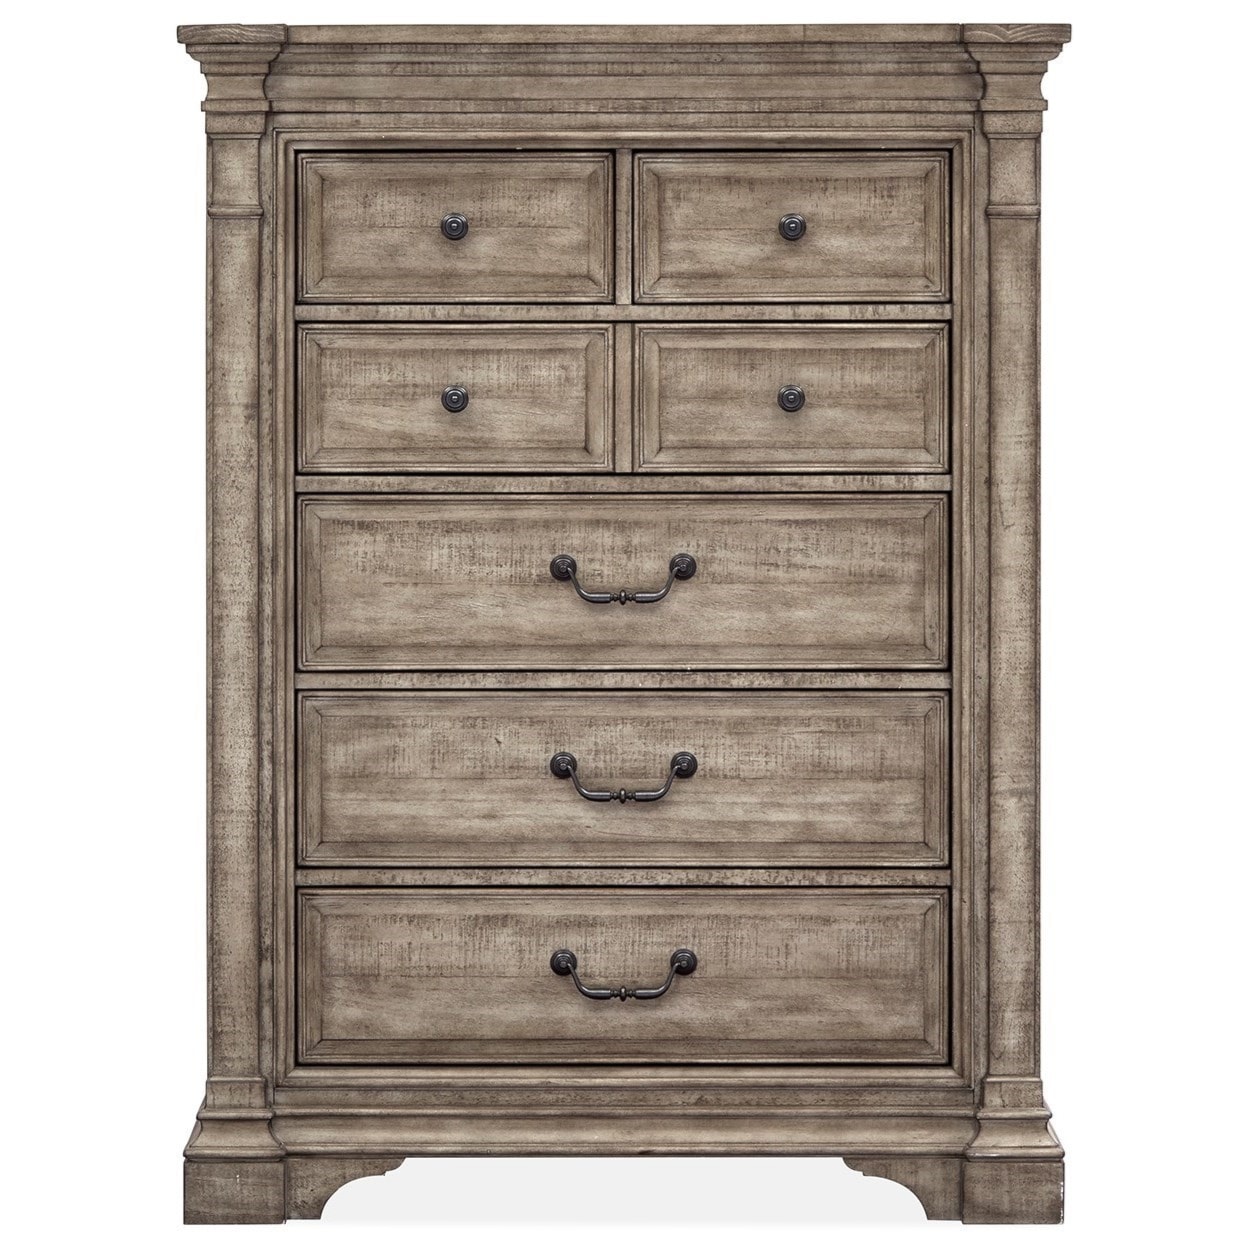 Magnussen Home Milford Creek Chest of Drawers